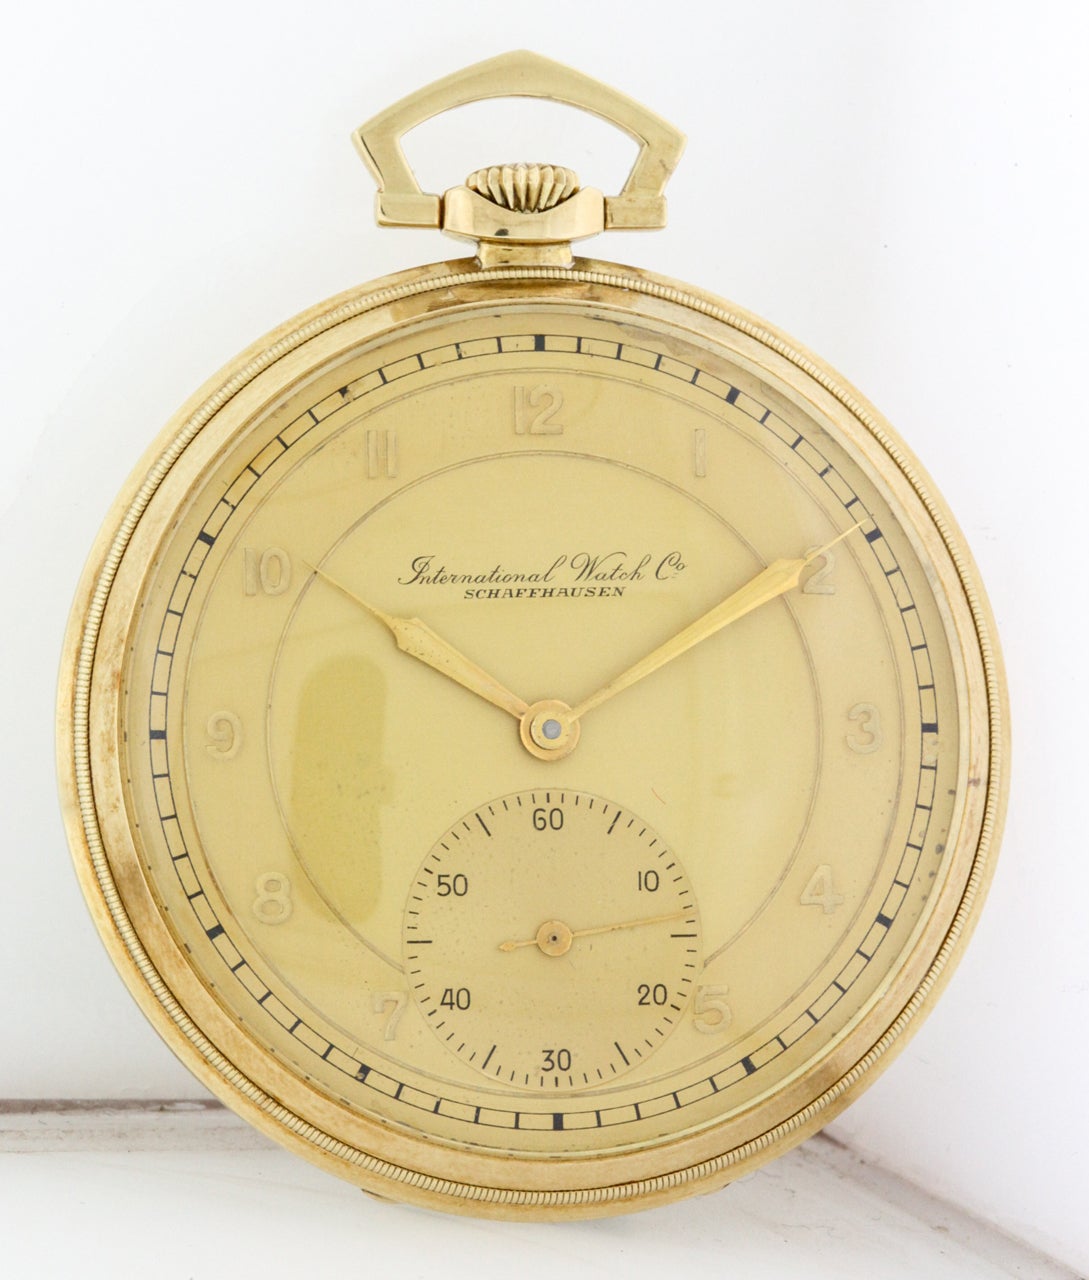 14k yellow gold open face IWC pocketwatch, made for the American market, circa 1940s. It has a 50mm case with beaded bezel, engine-turned striped back, inner cuvette, gilt movement, two-tone champagne target dial with outer minutes chapter, applied